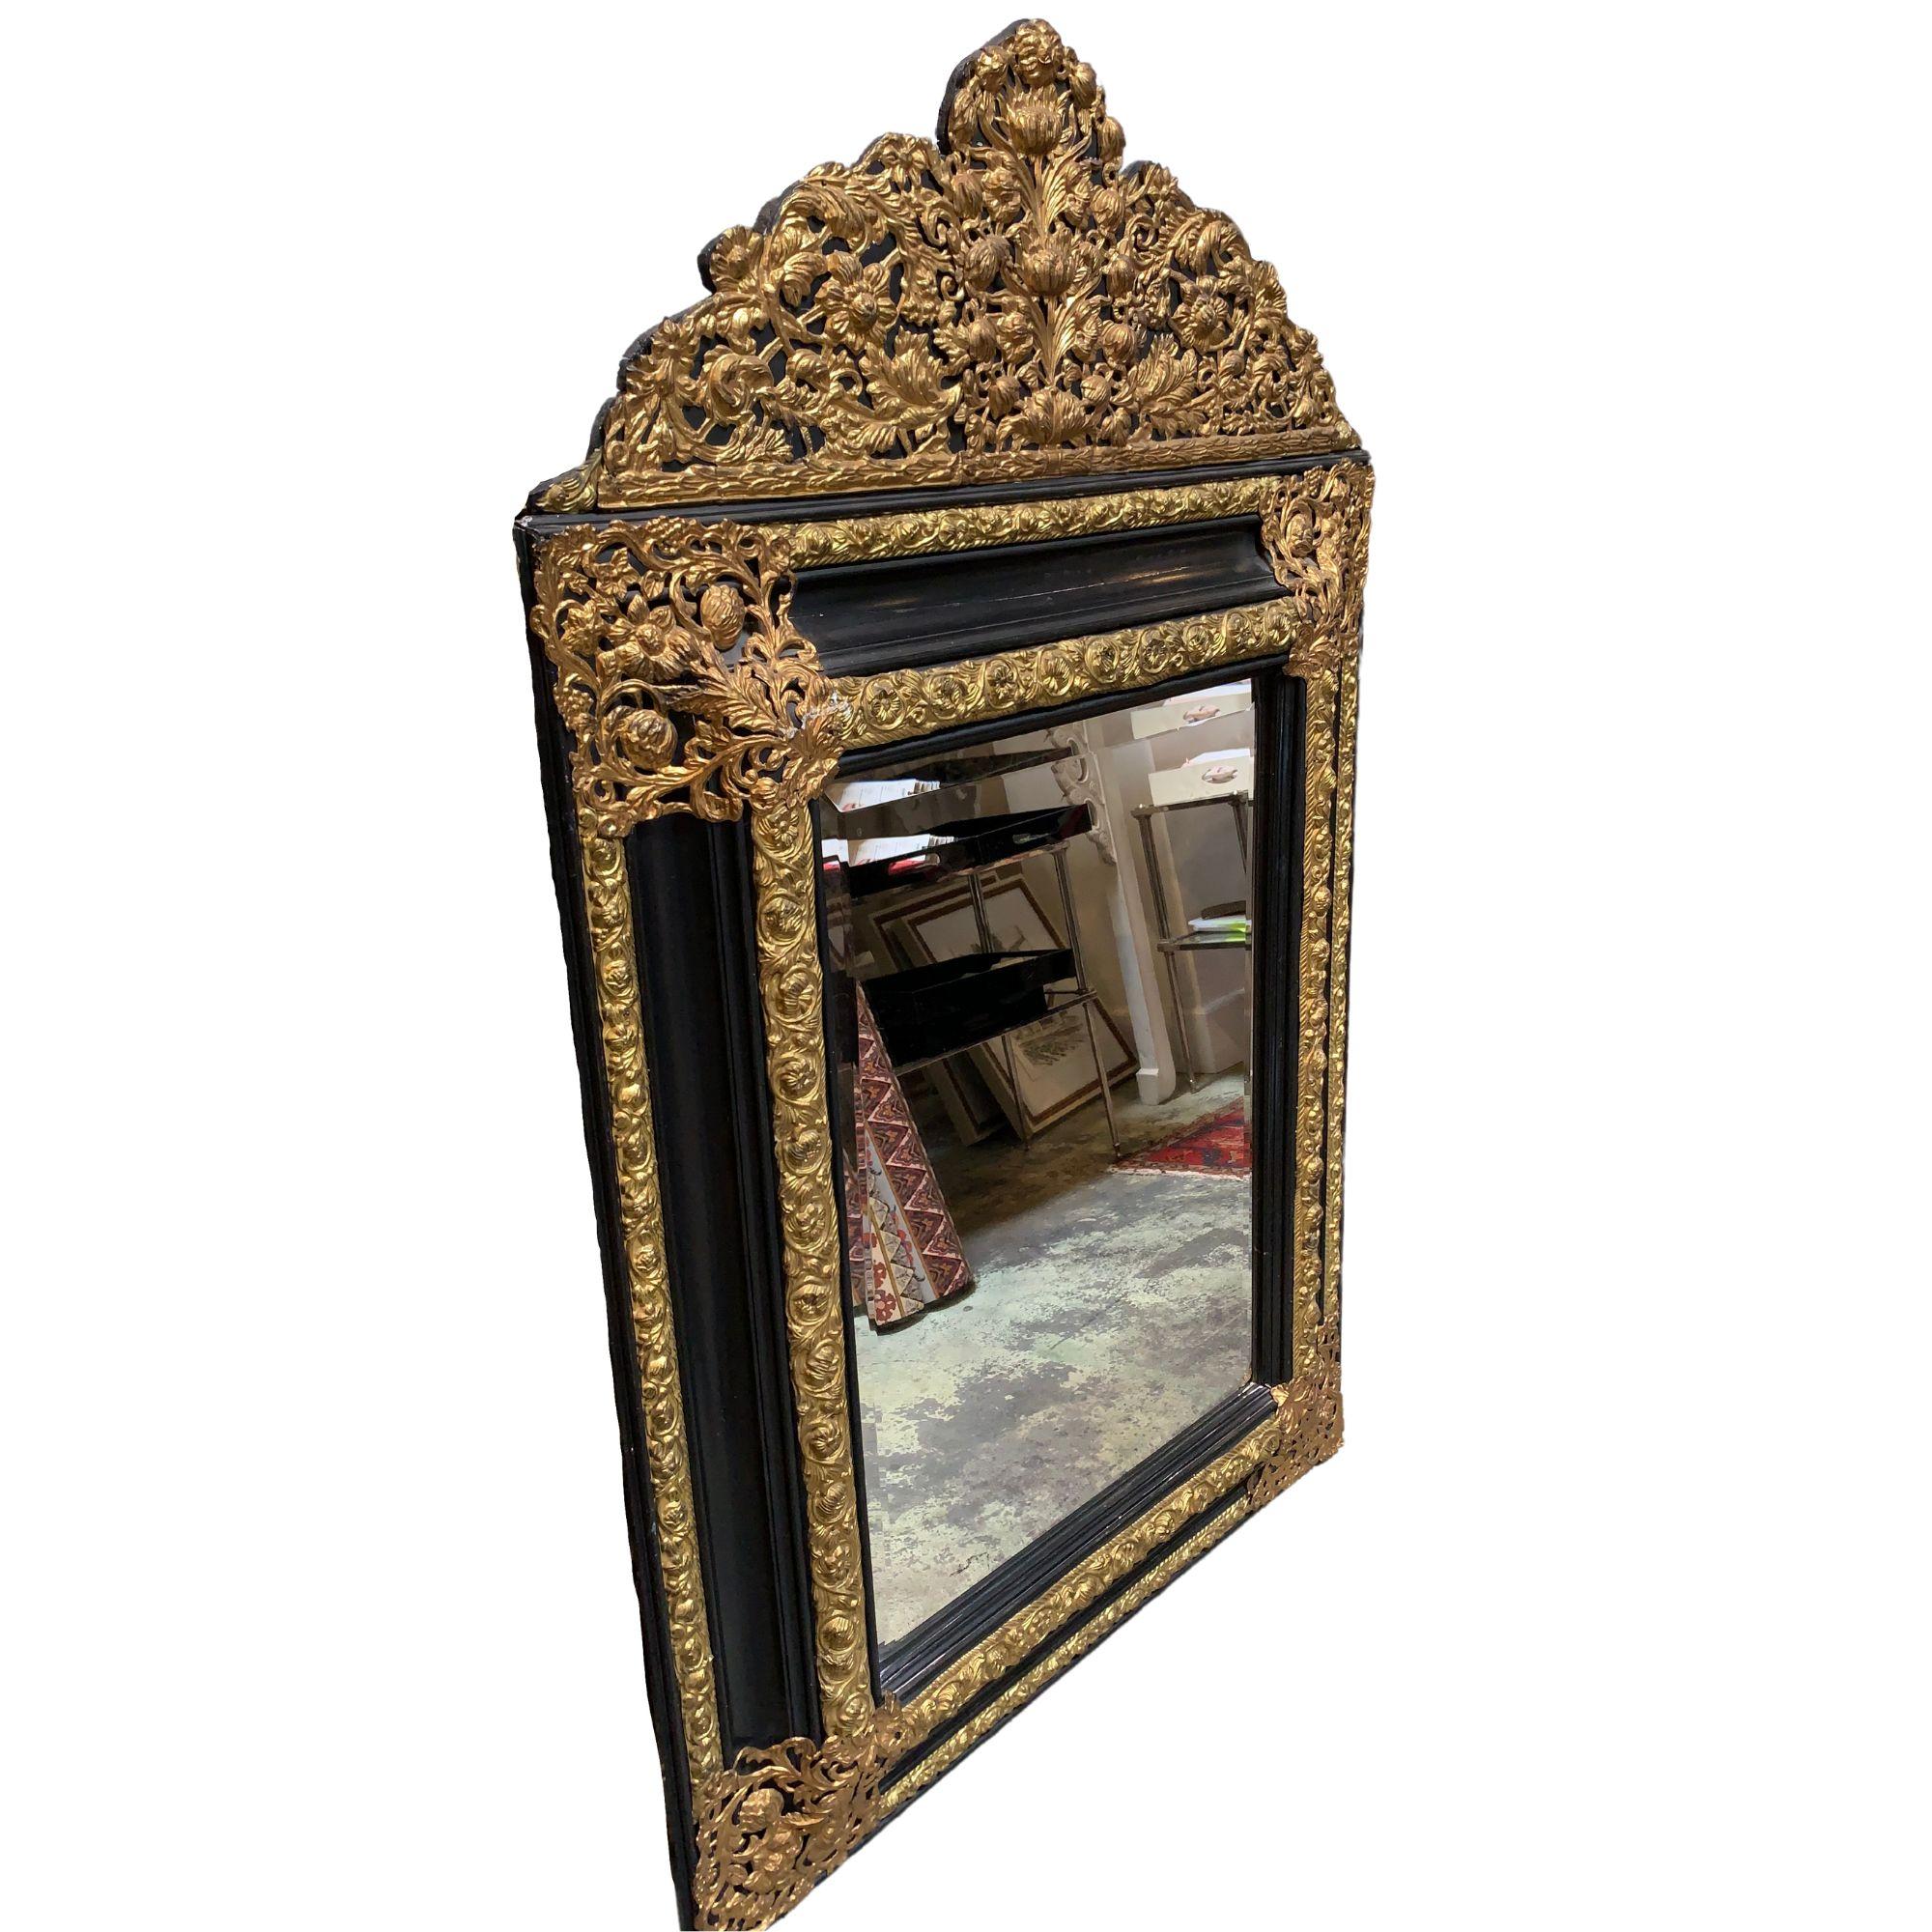 A beautiful French repousse mirror from the 19th century.